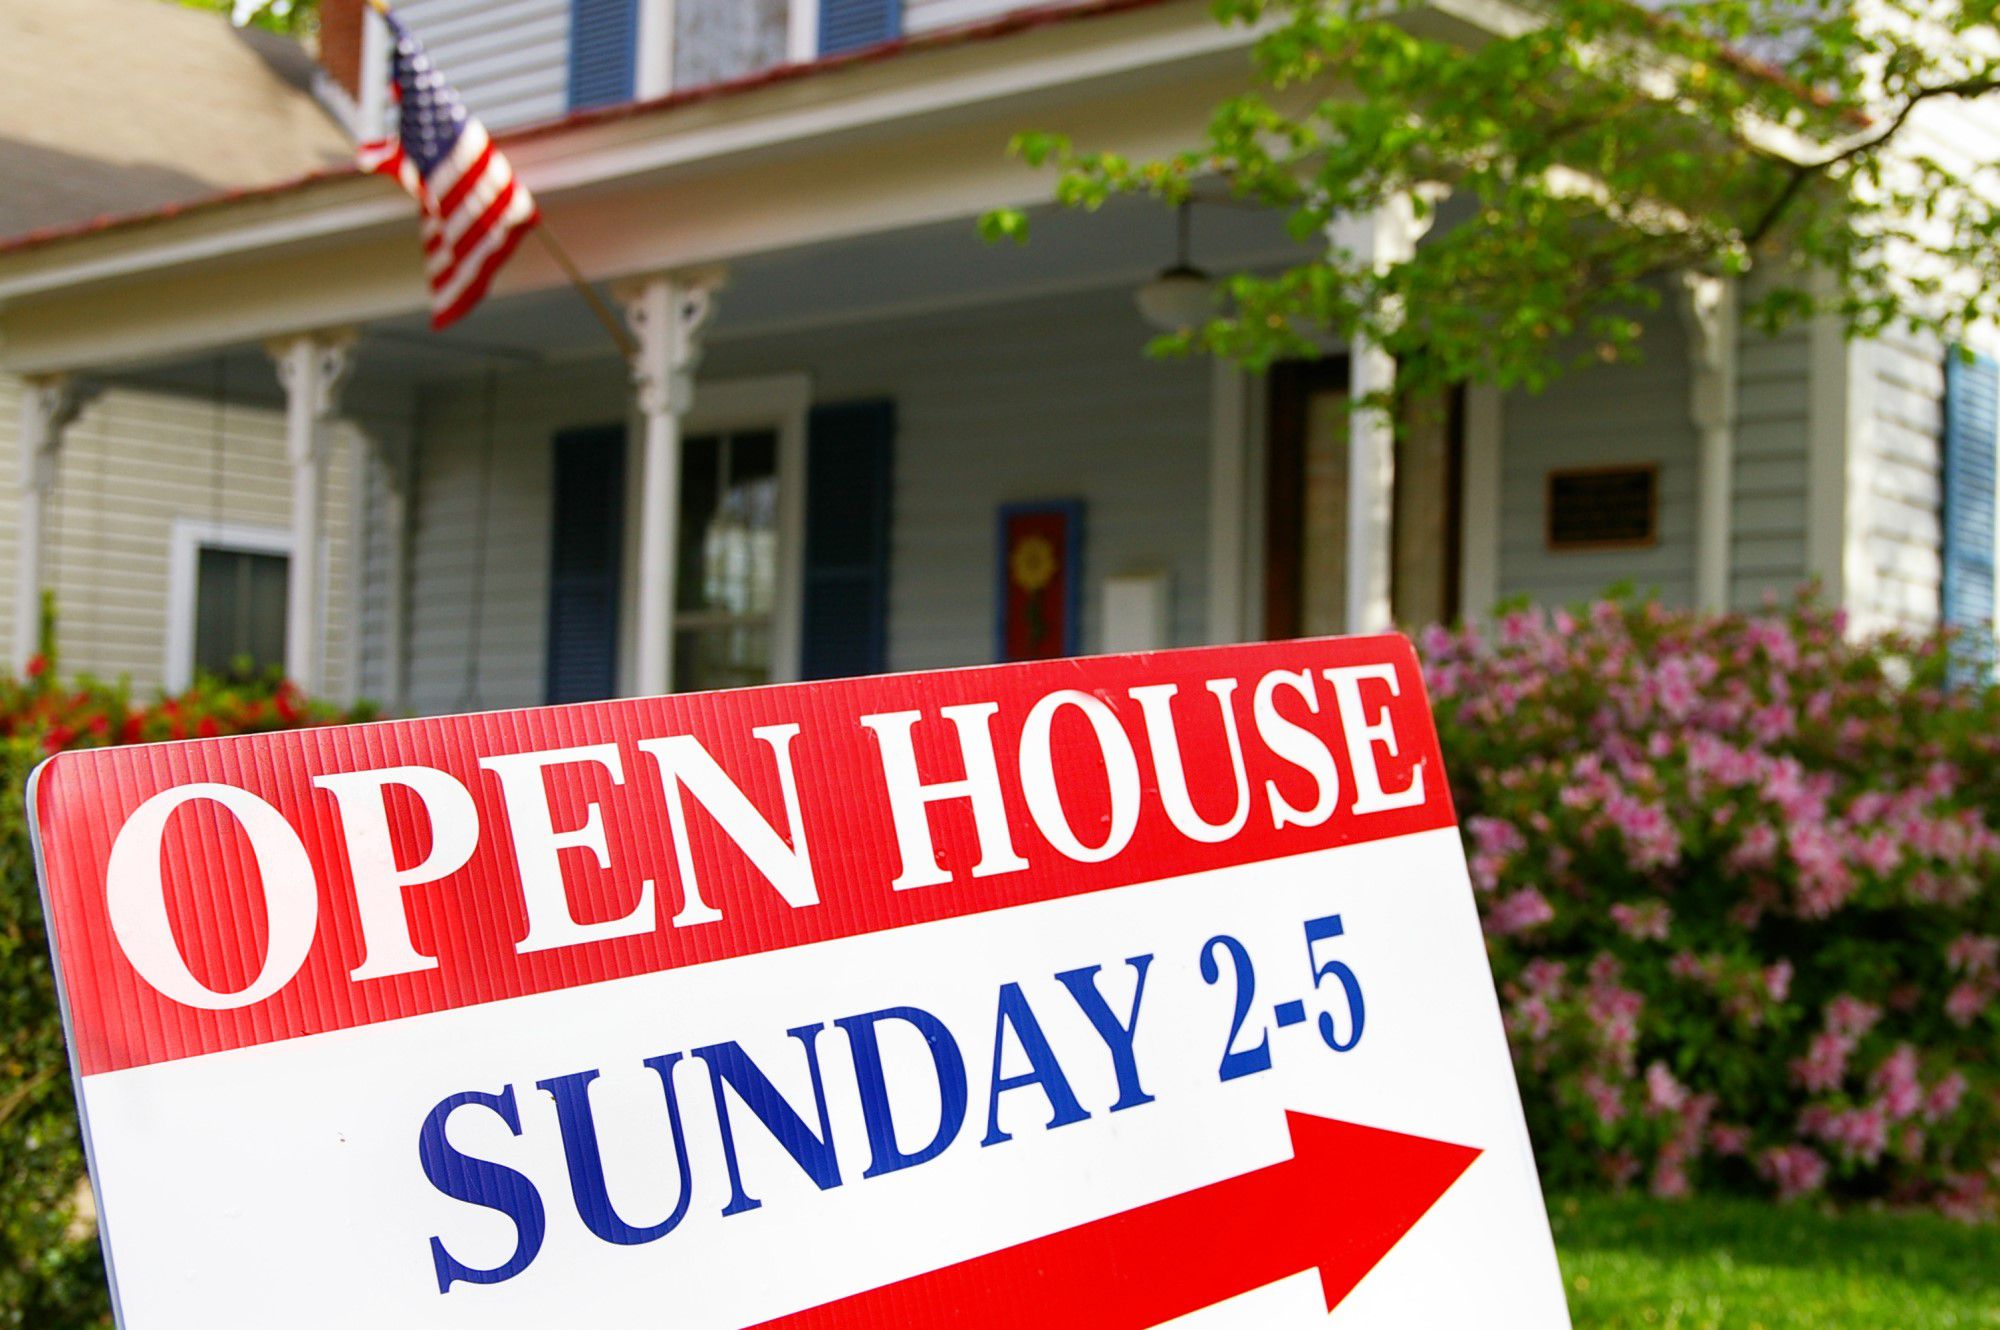 Adobe Stock of an open house sign